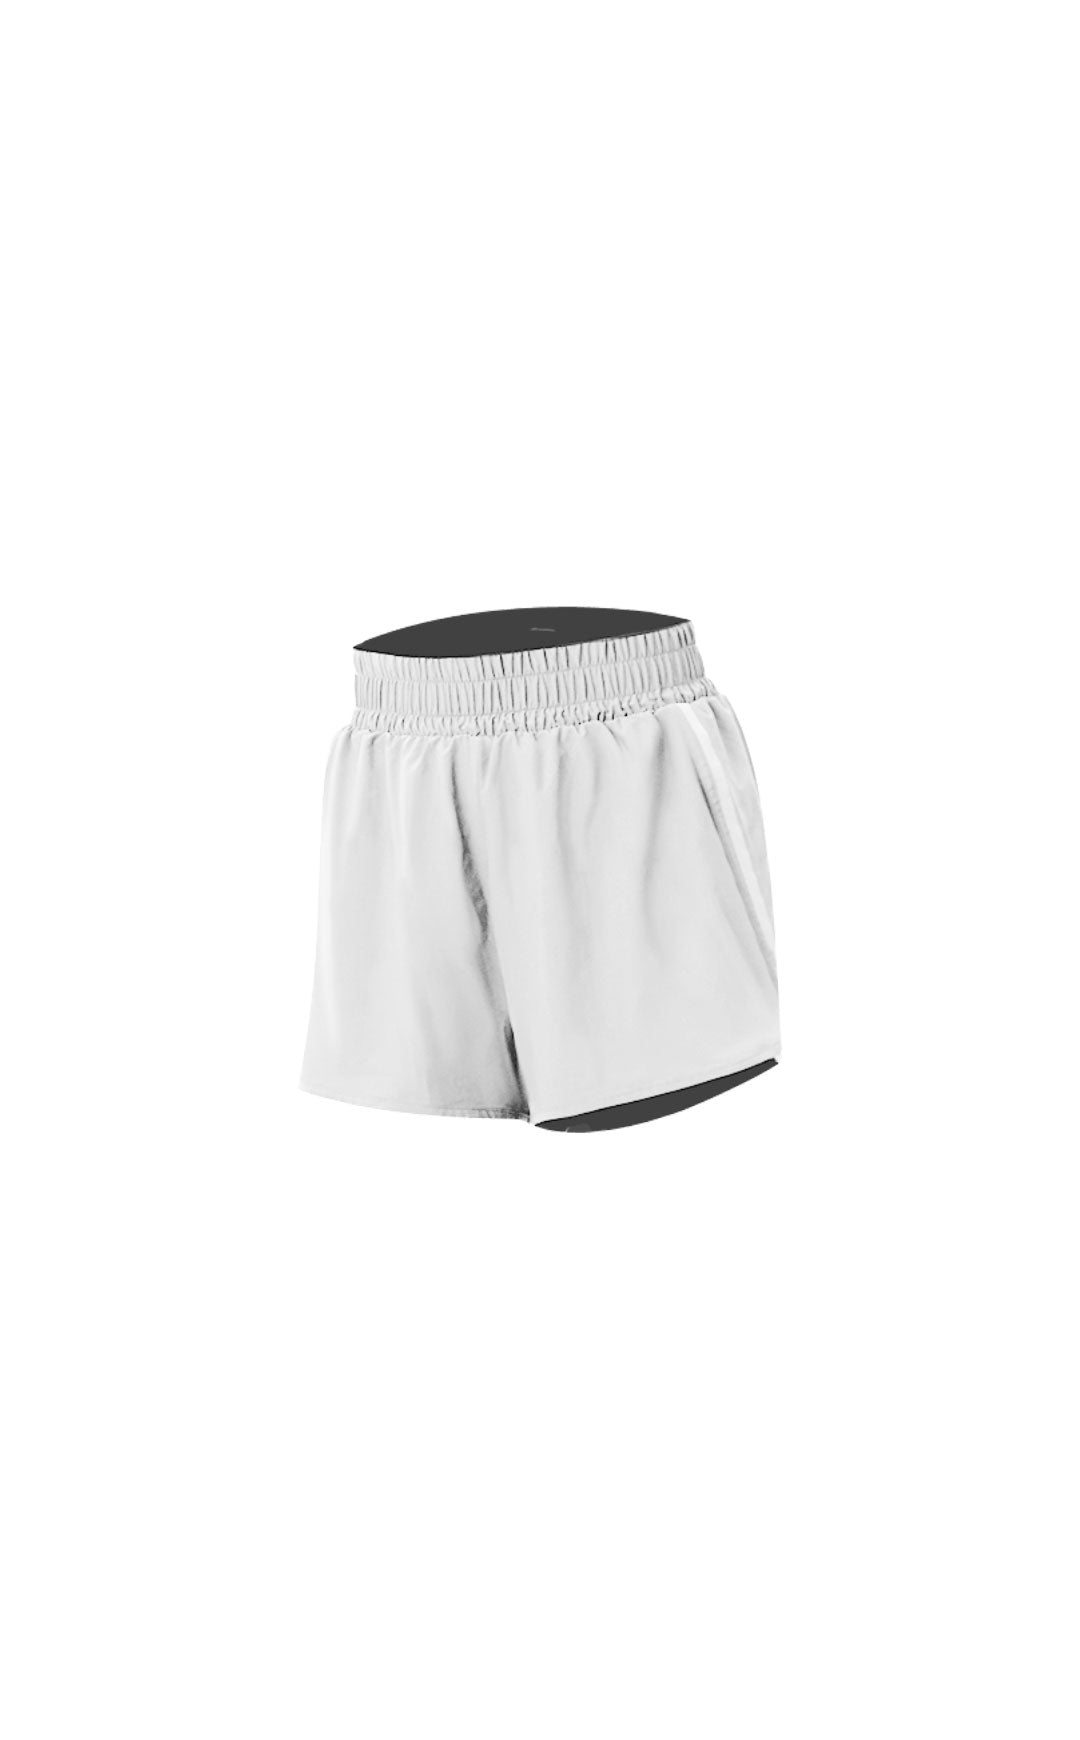 Breeze Run Short - Snow, Women's Bottoms from Vitality Athletic and Athleisure Wear